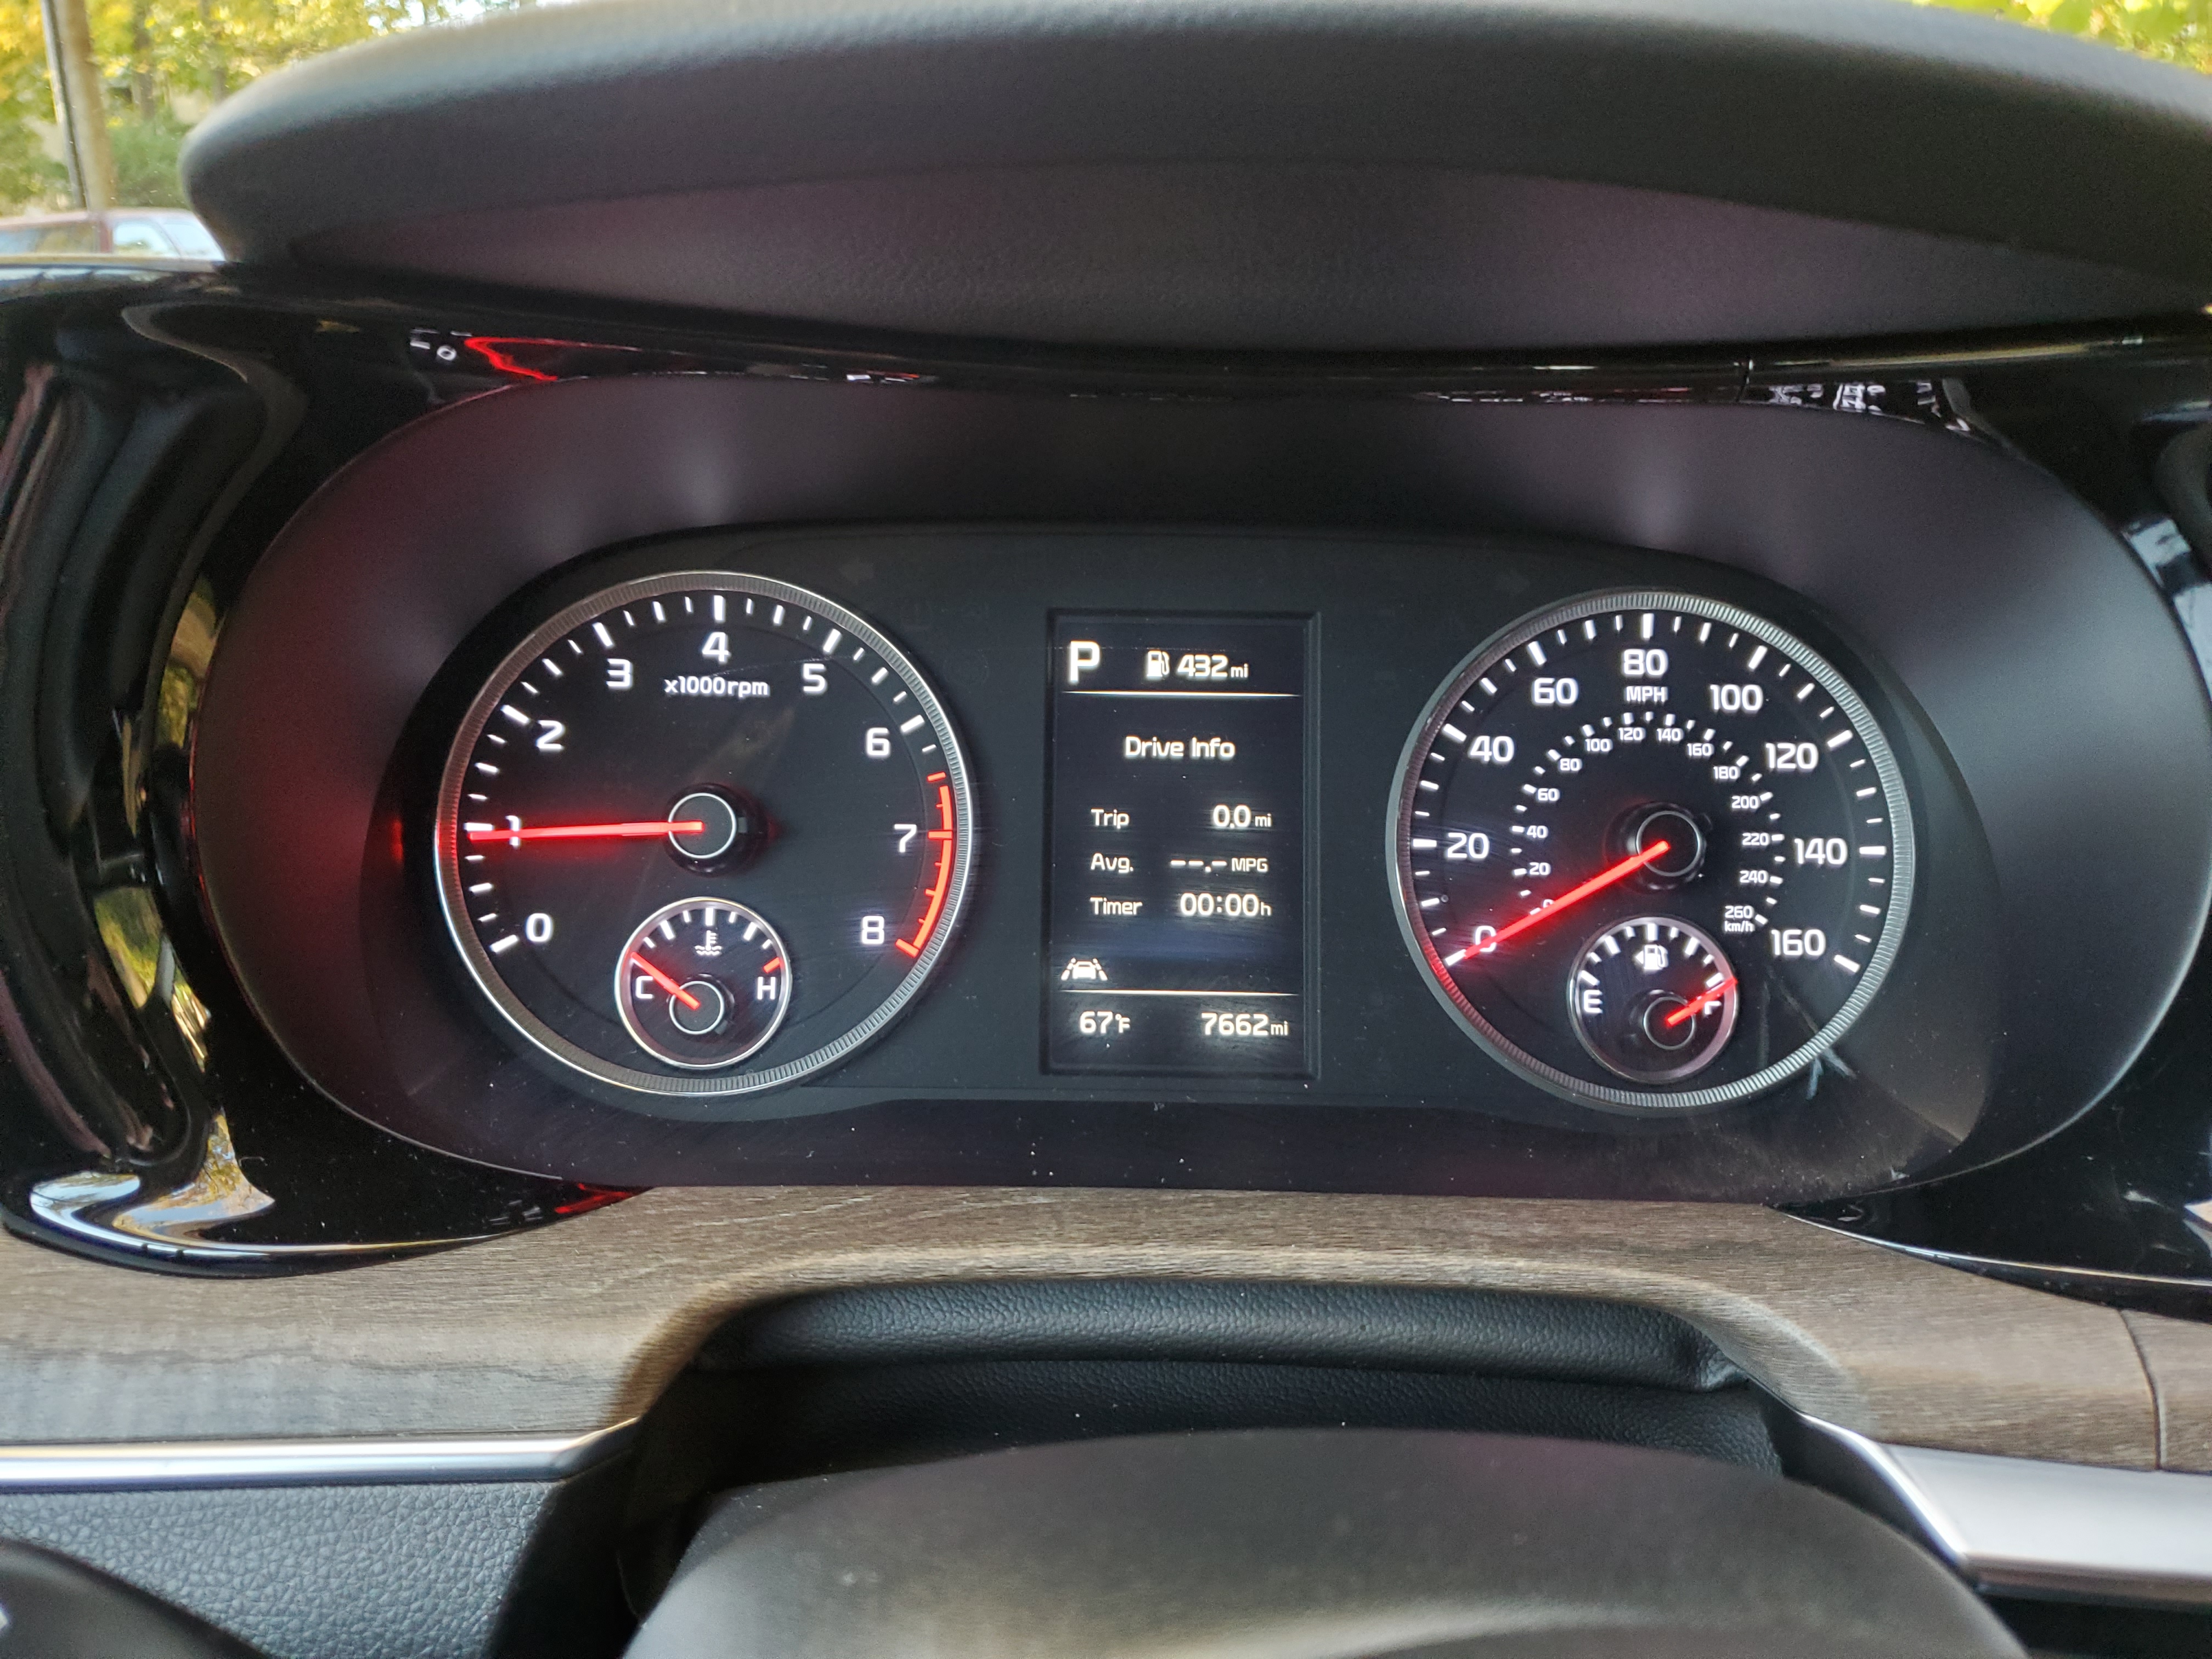 Kia's K5 features a tradition driver's gauge display